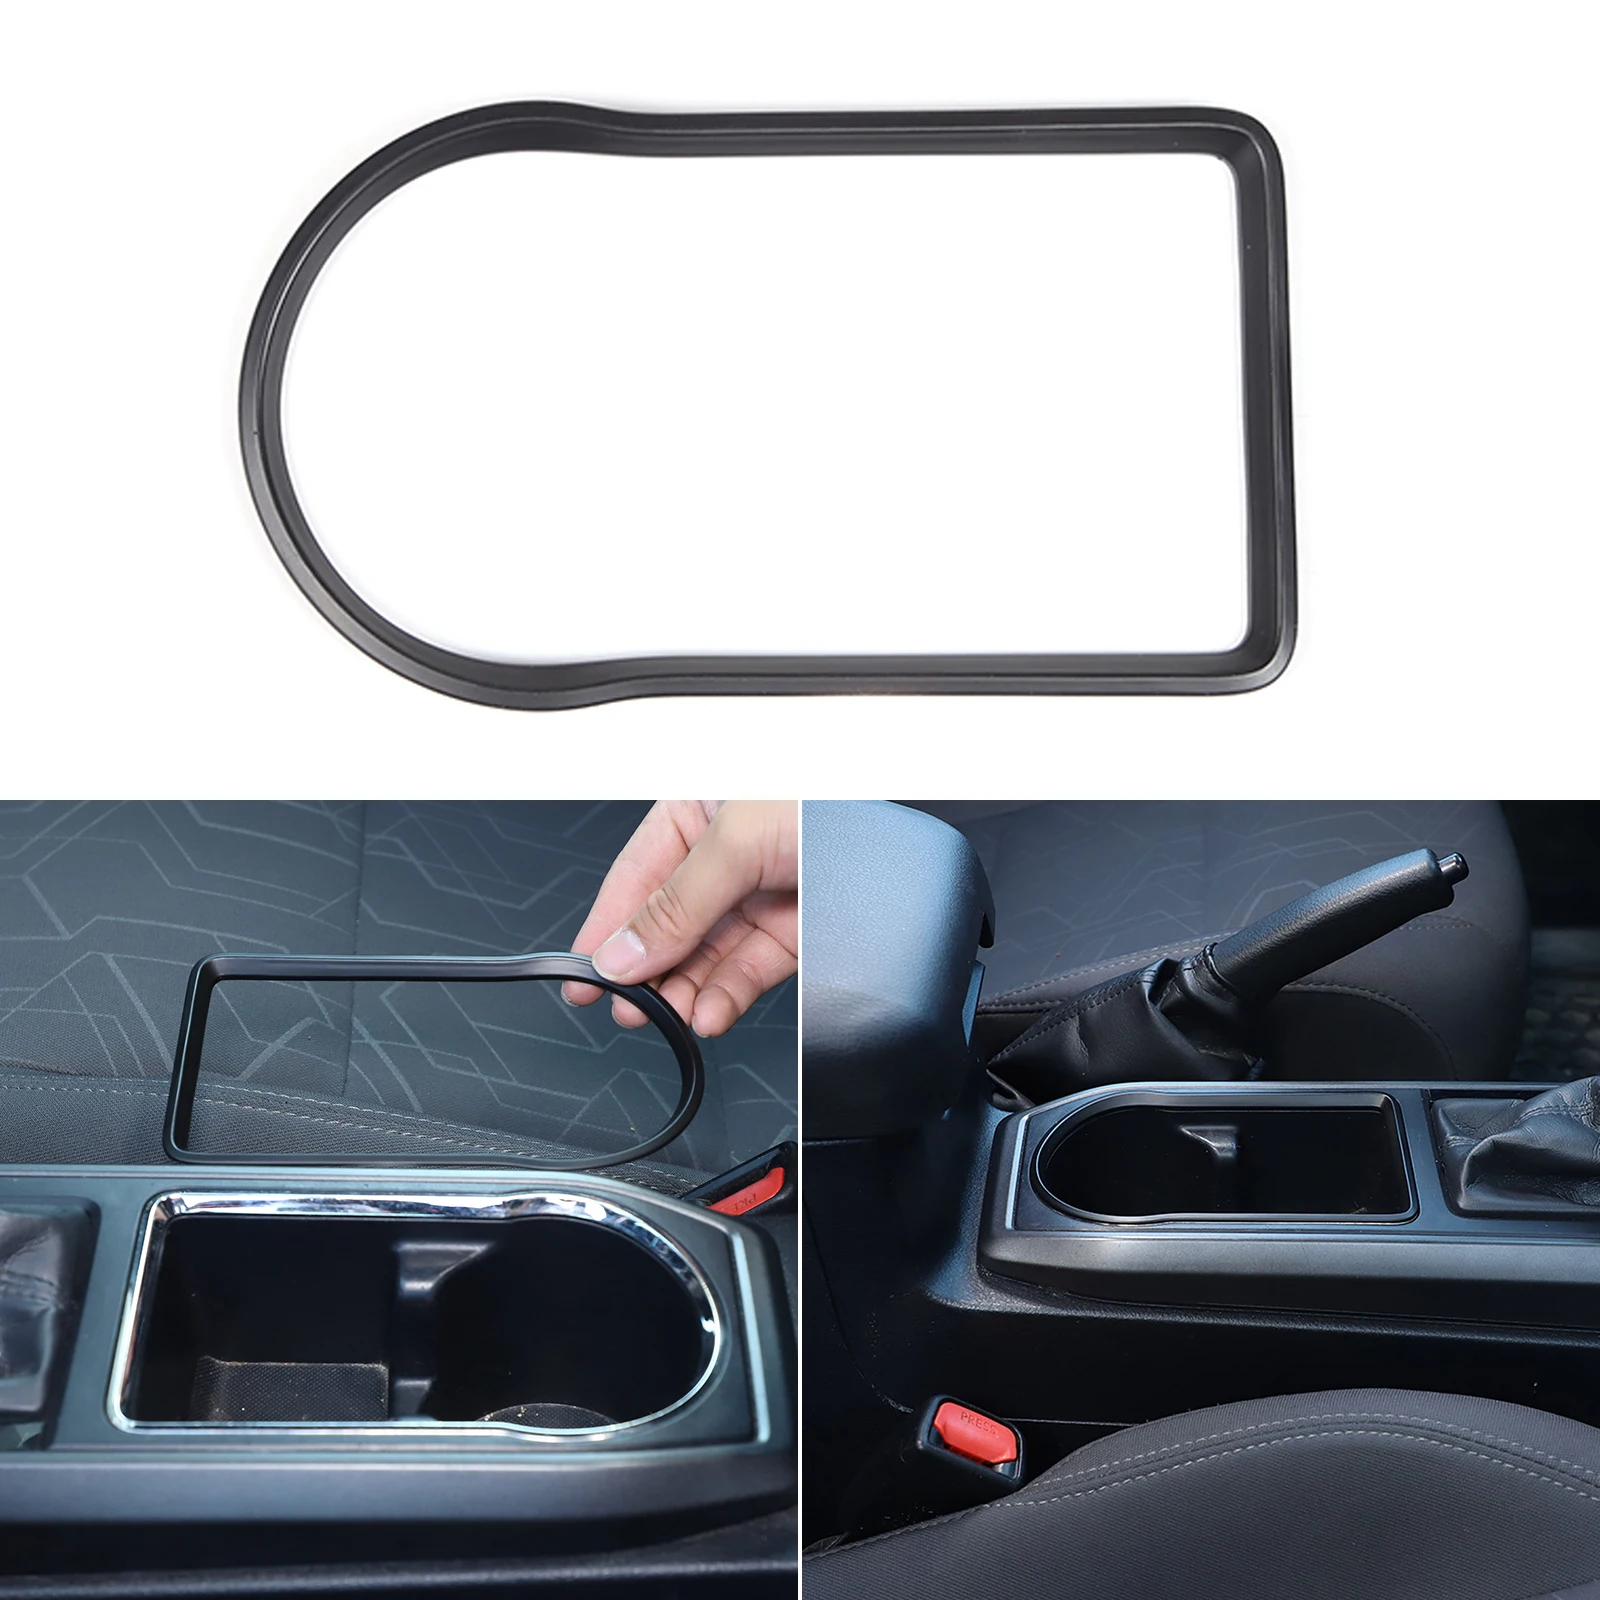 

For Toyota Tacoma 2016-2022 ABS Car Central Control Gear Shift Panel Rear Cup Holder Frame Trim Cover Car Accessories